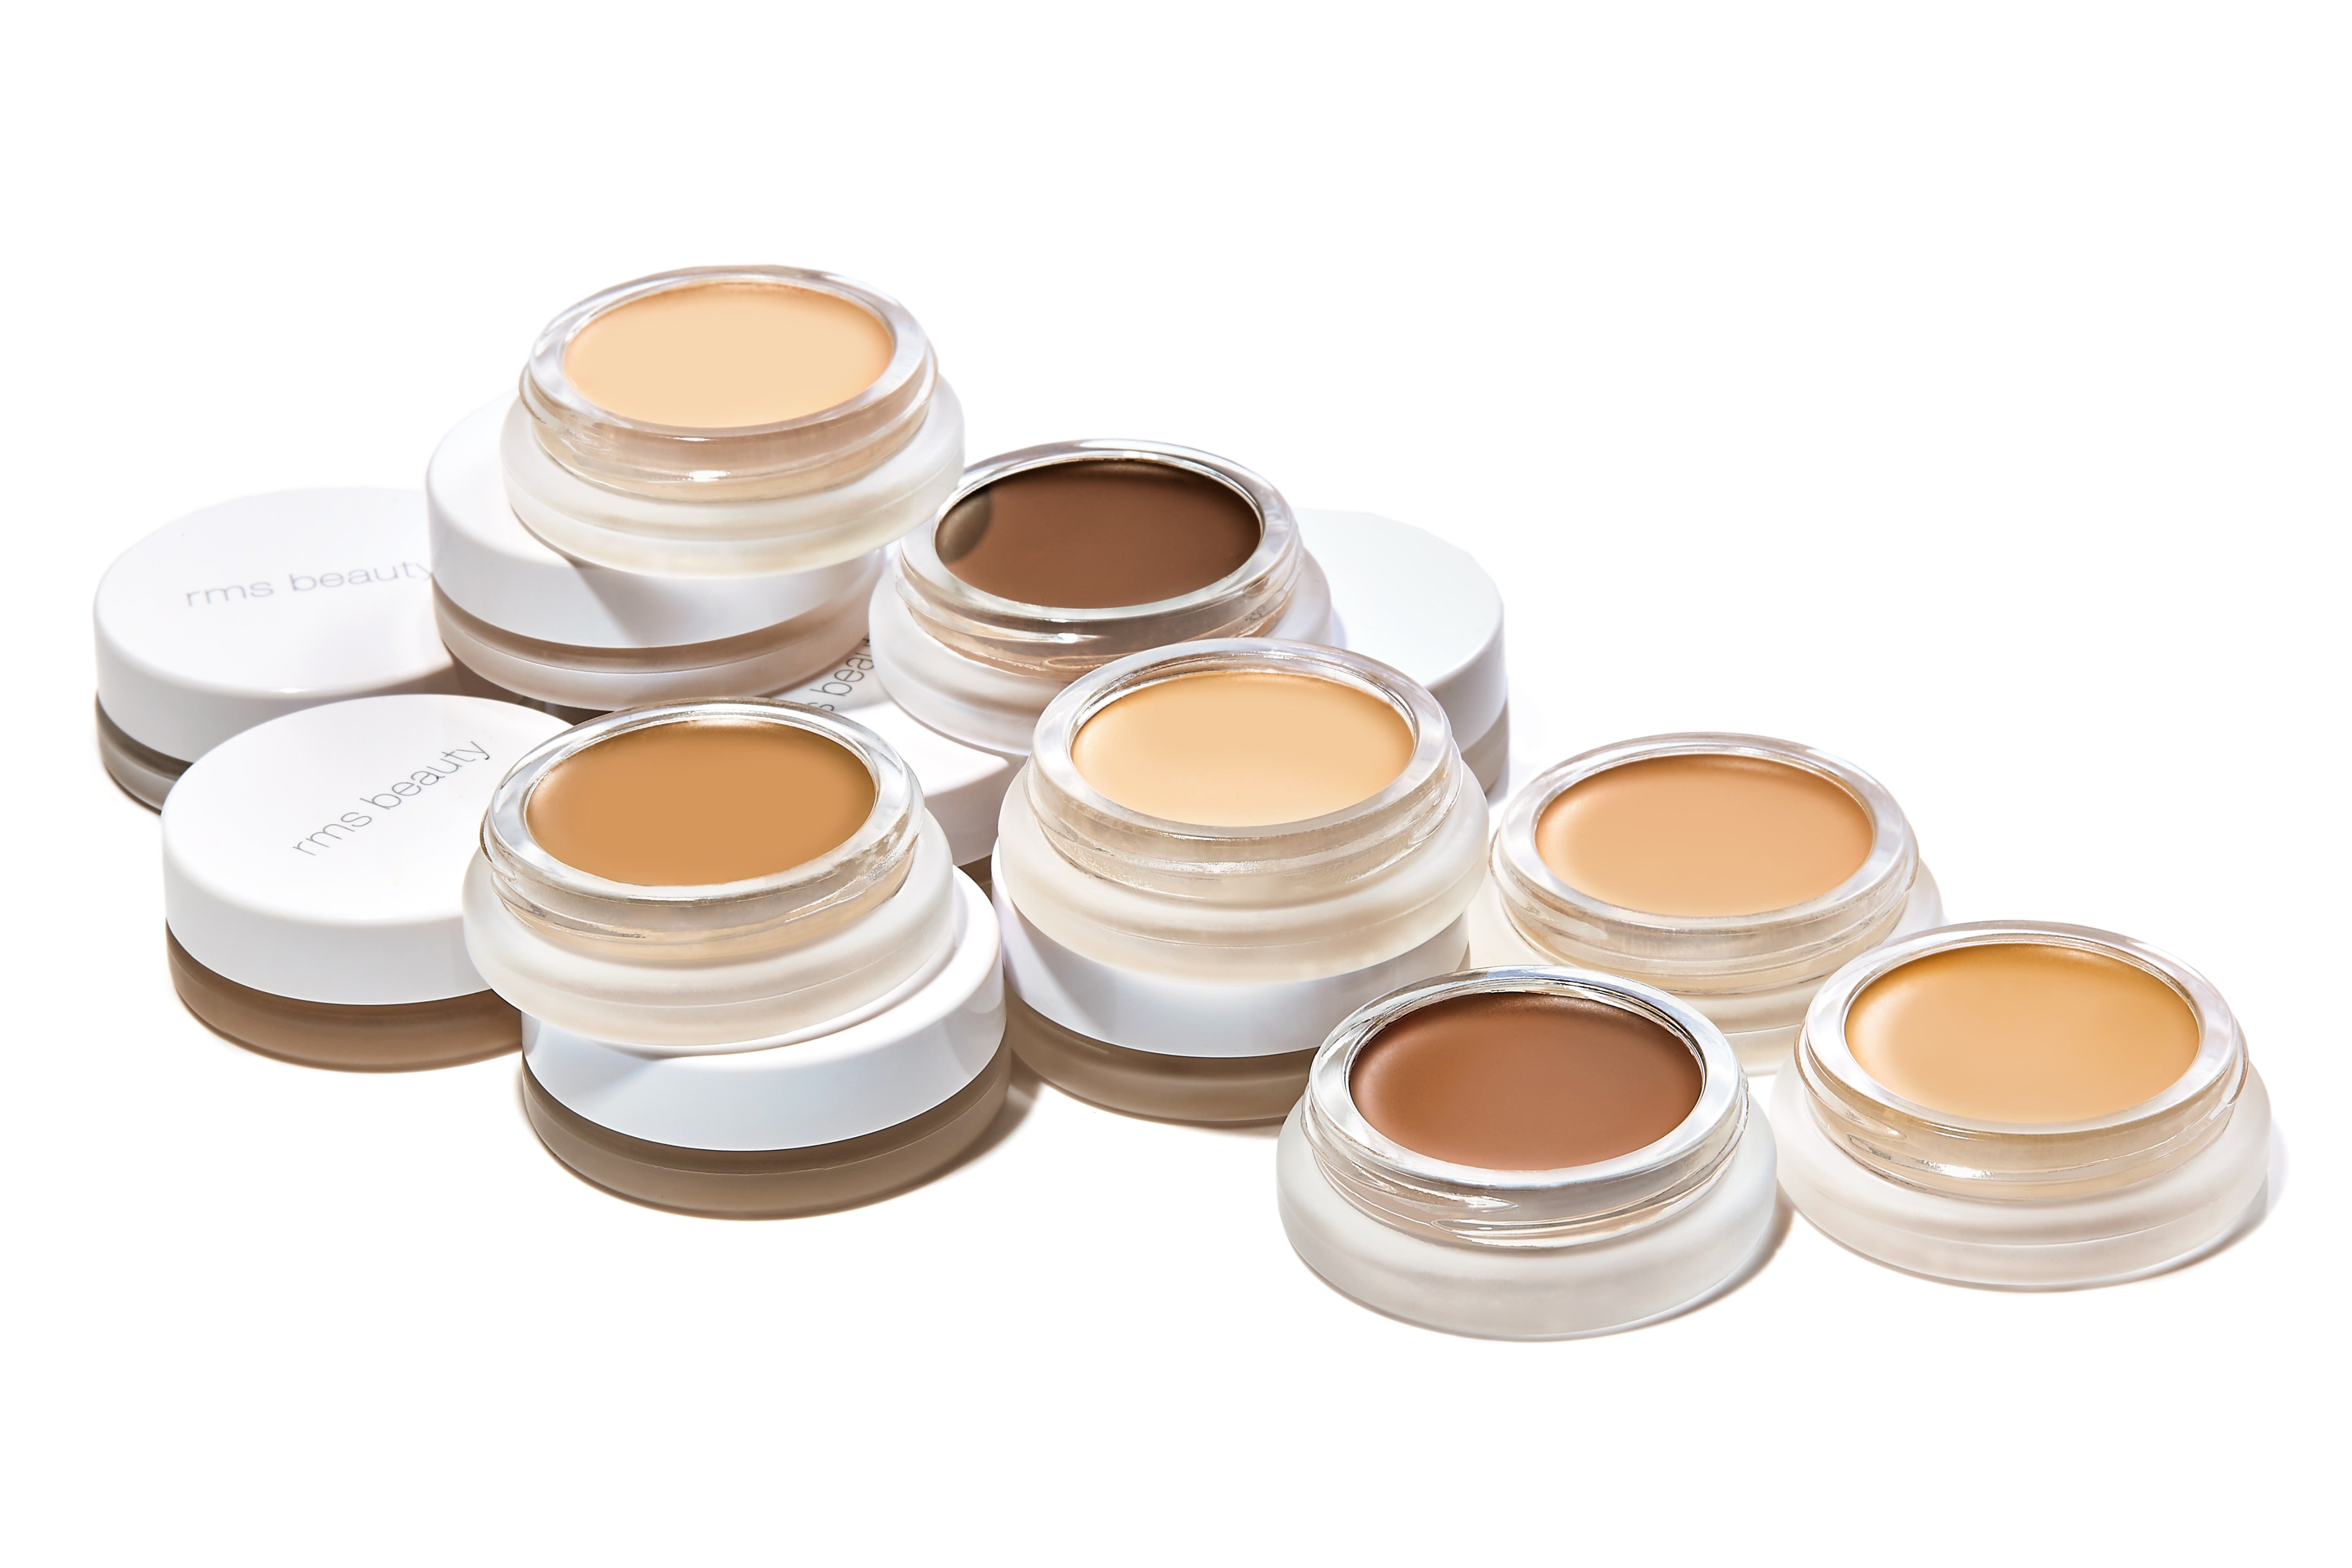 How to Choose Foundation Shade According to the Skin Tone